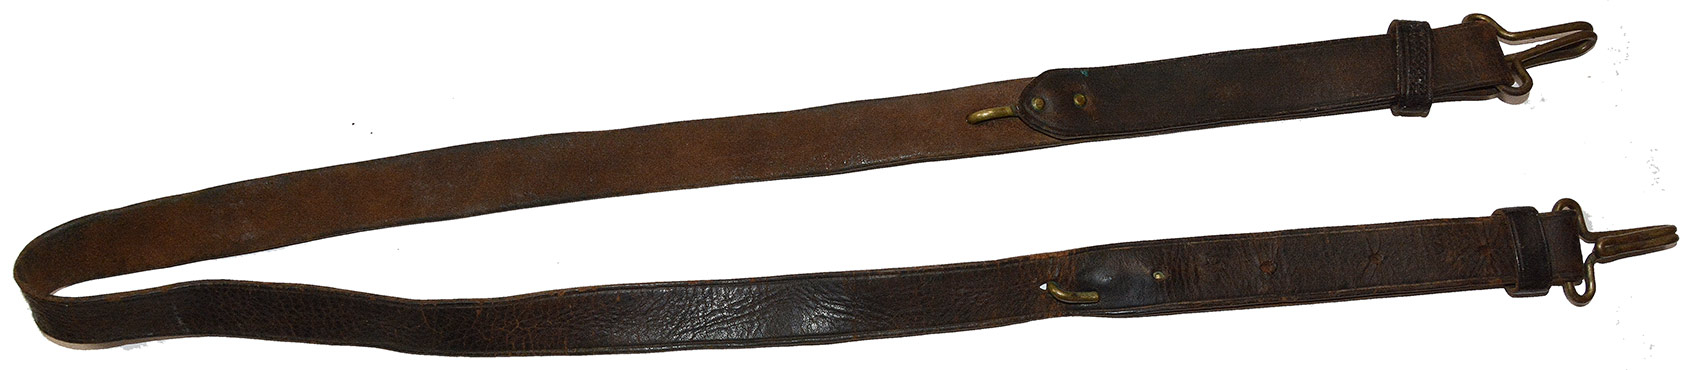 SCARCE U.S. PATTERN 1878 CANTEEN AND HAVERSACK LEATHER SHOULDER STRAP